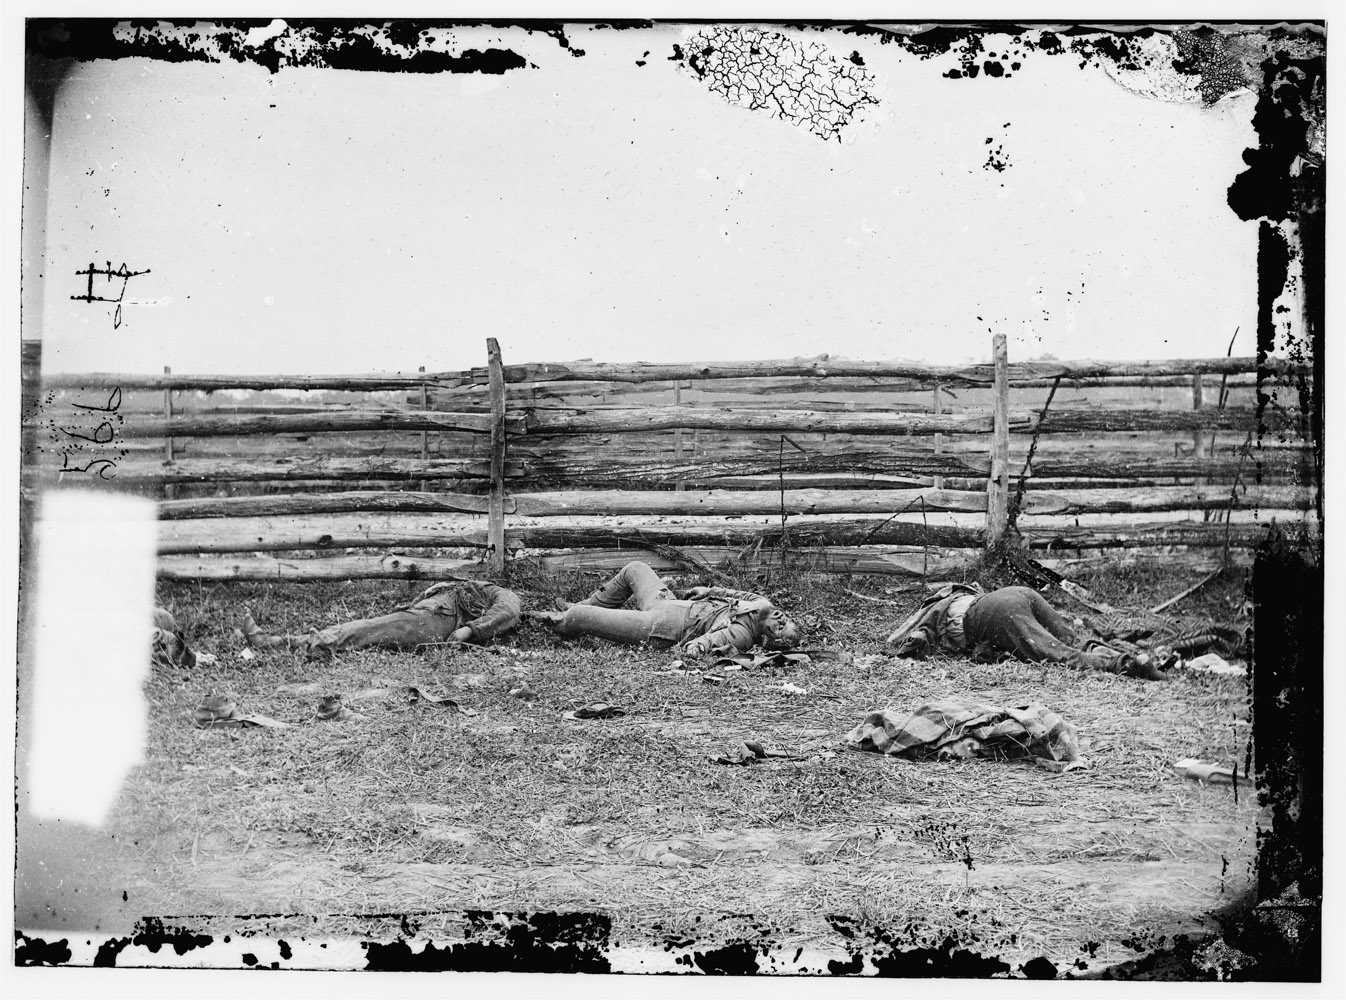 Dead of Stonewall Jackson's Brigade by rail fence on the Hagerstown pike.